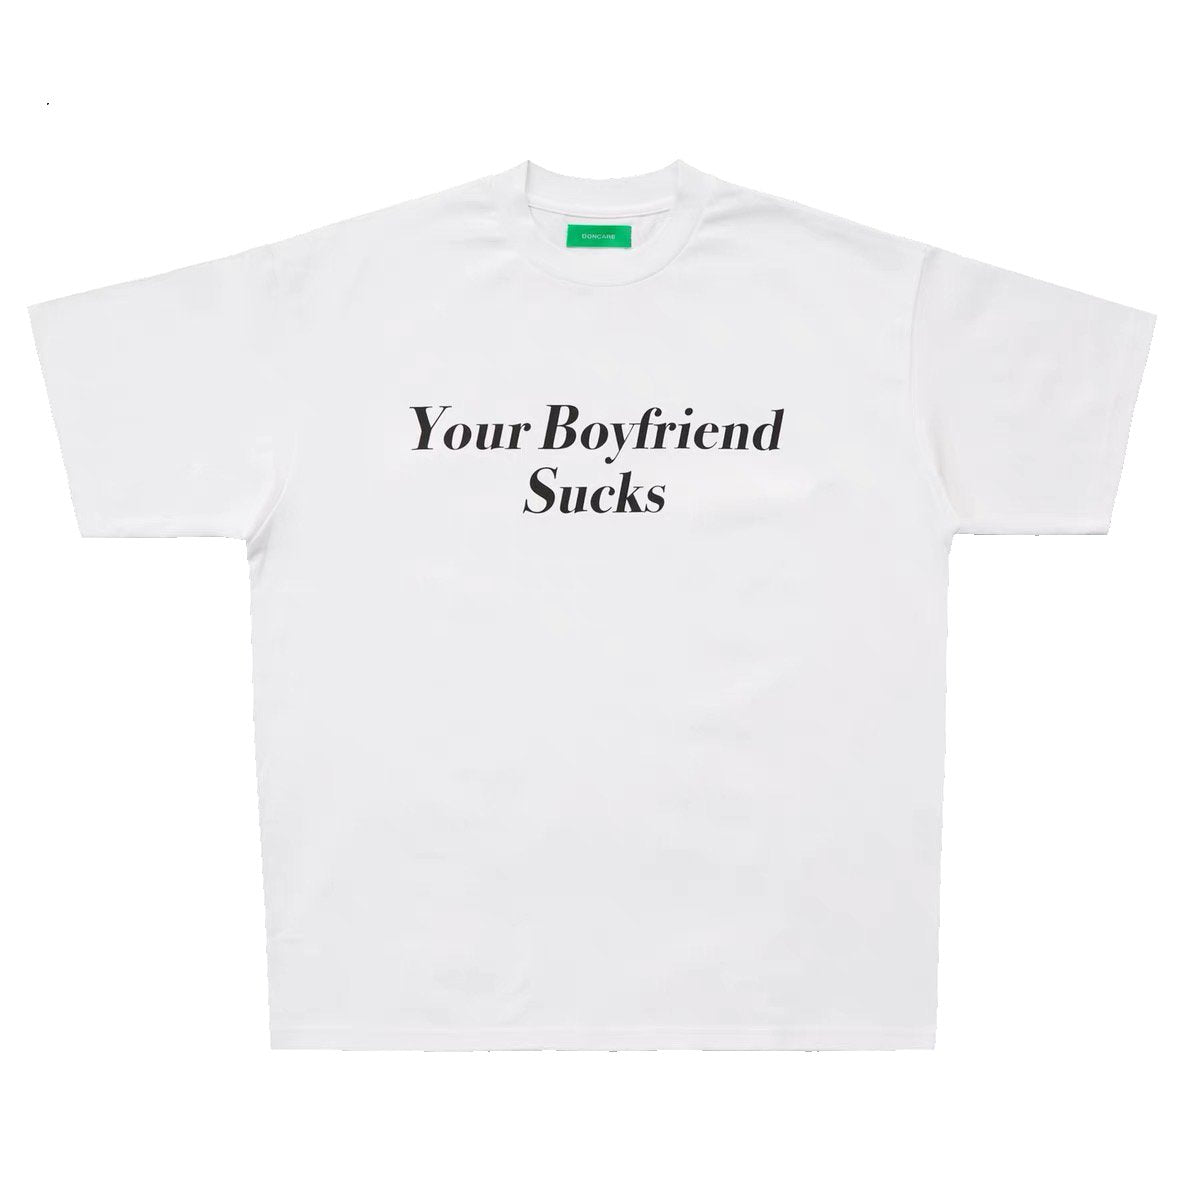 DONCARE "YOUR BF SUCKS Tee" - White